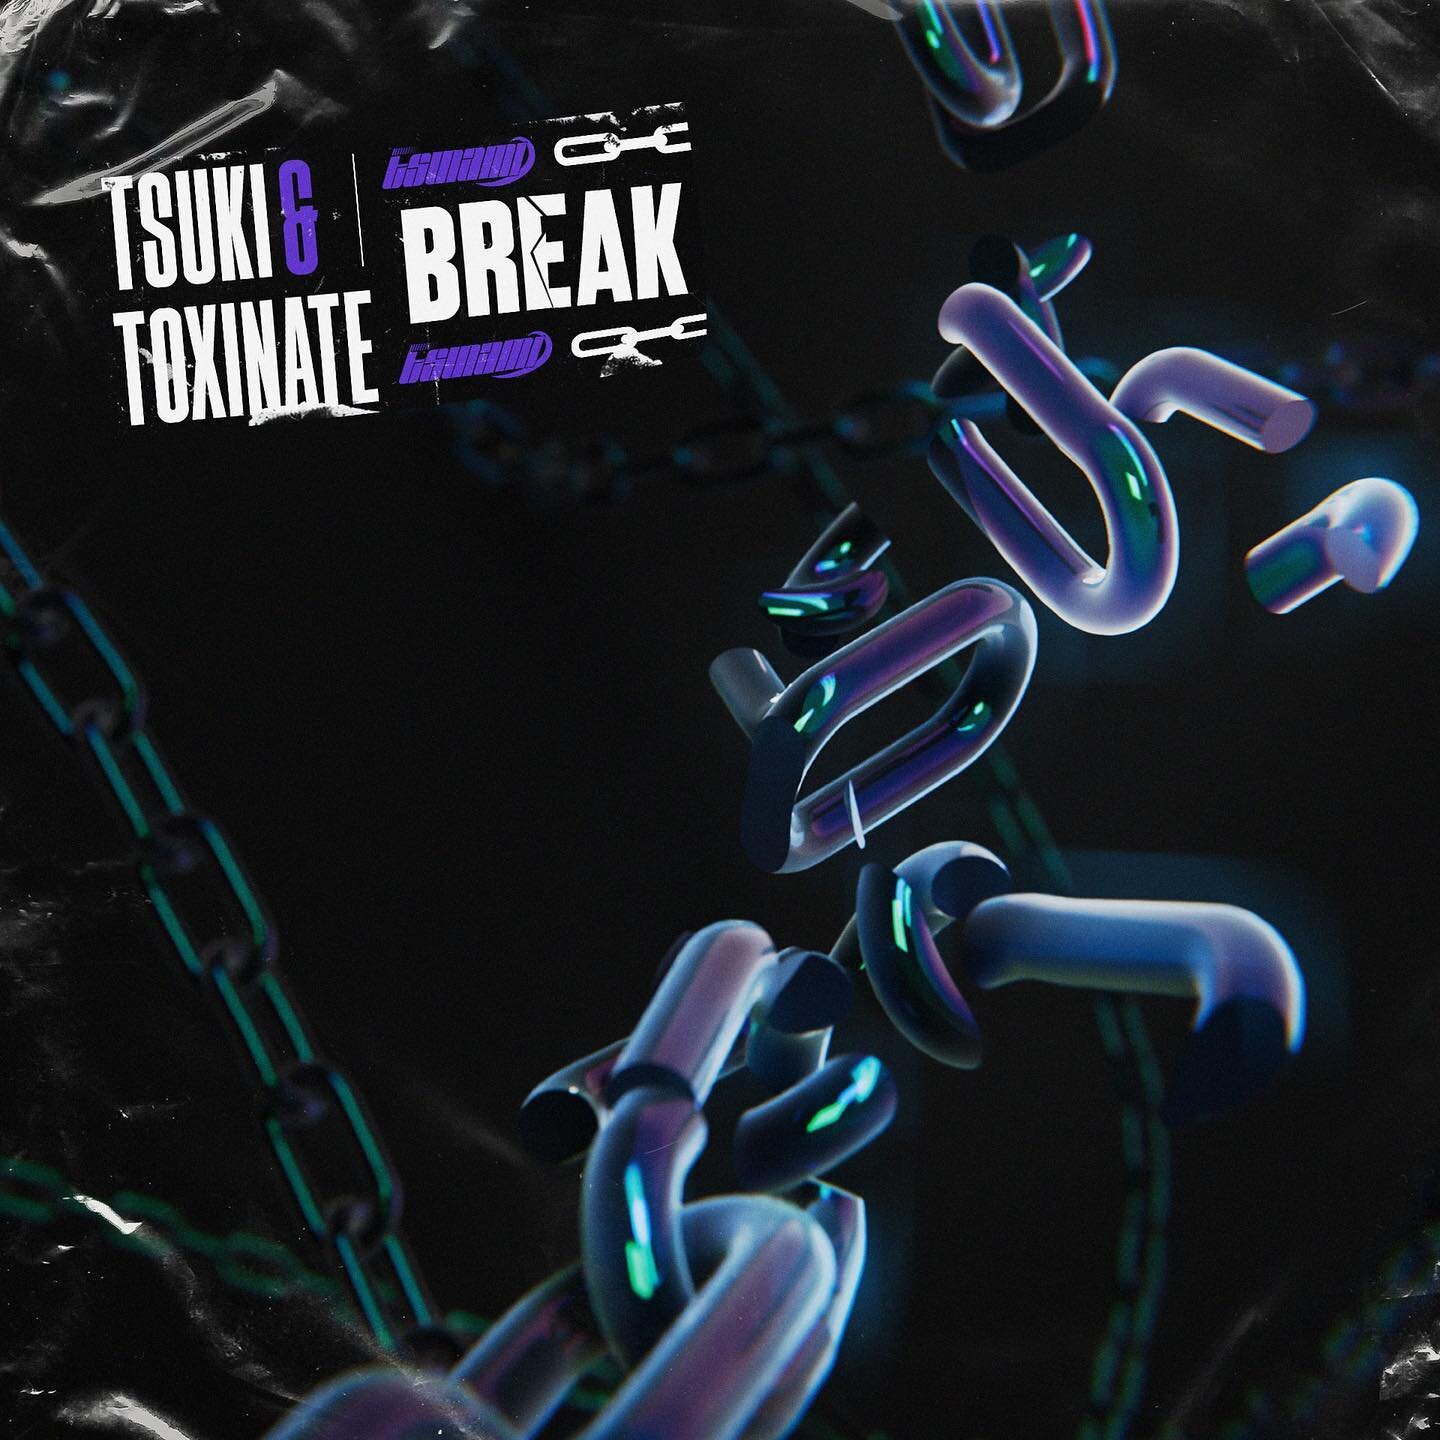 Tsuki &amp; Toxinate - Break 💔⛓️

OUT AT MIDNIGHT!